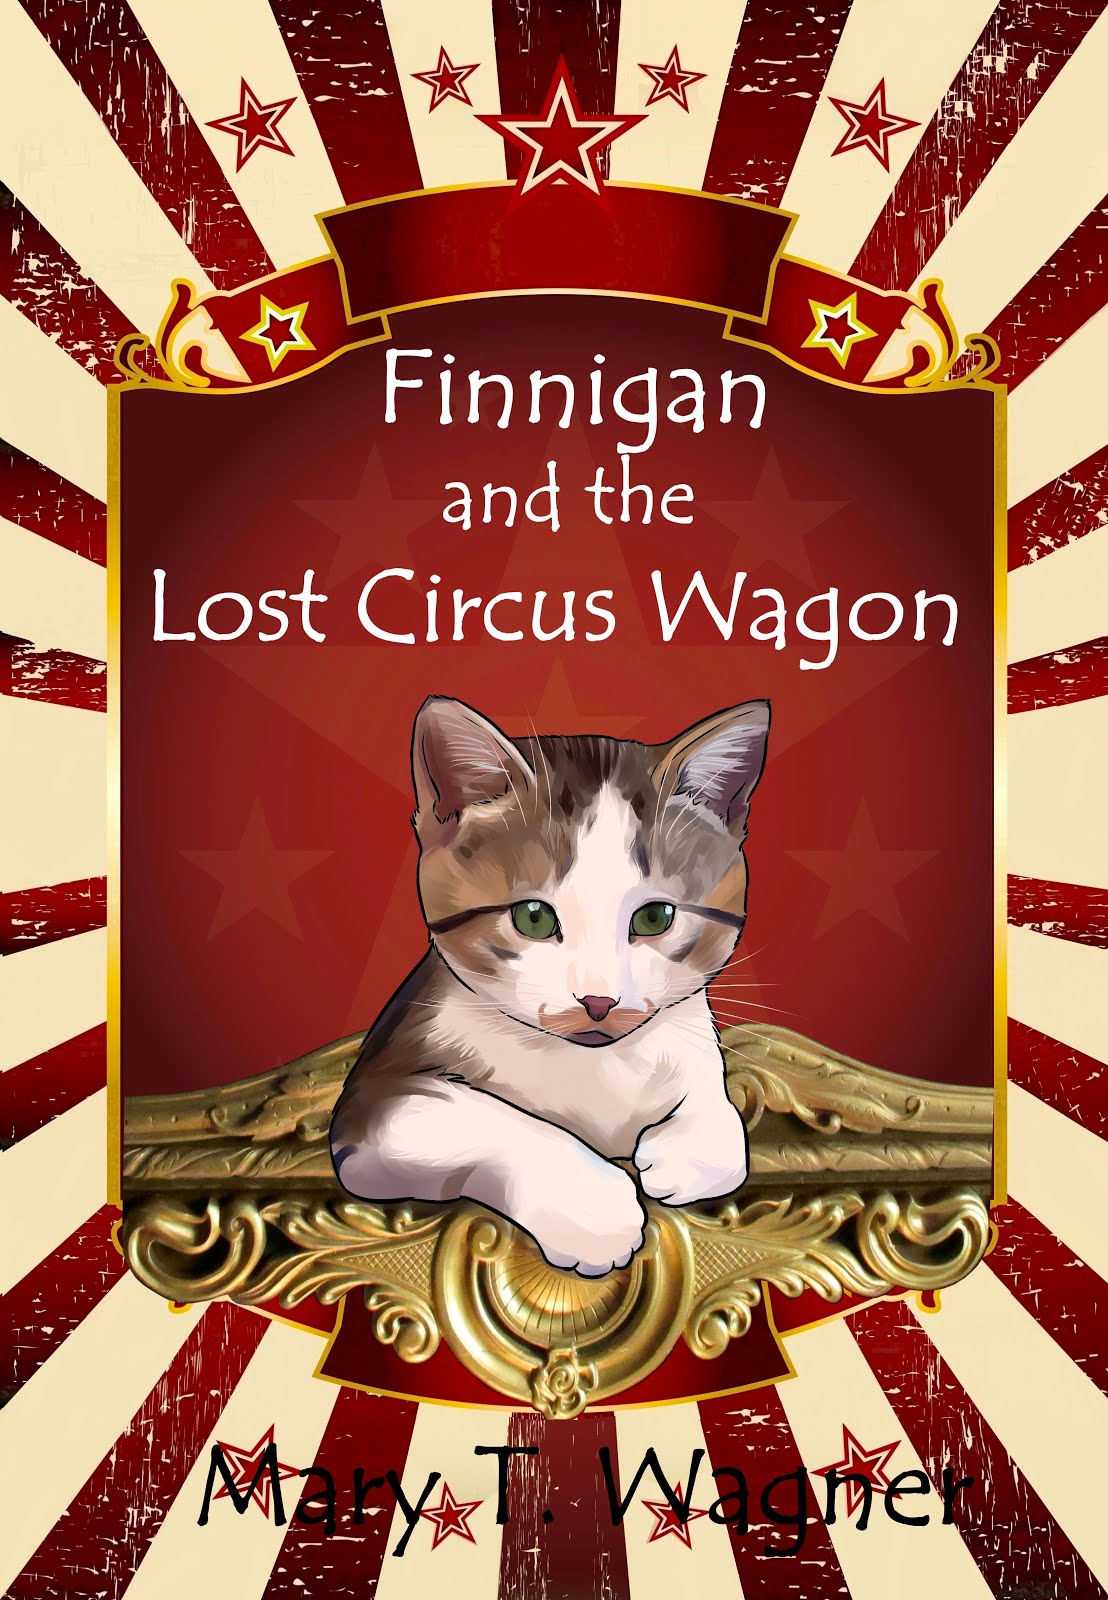 Book 2 of the Finnigan Series!